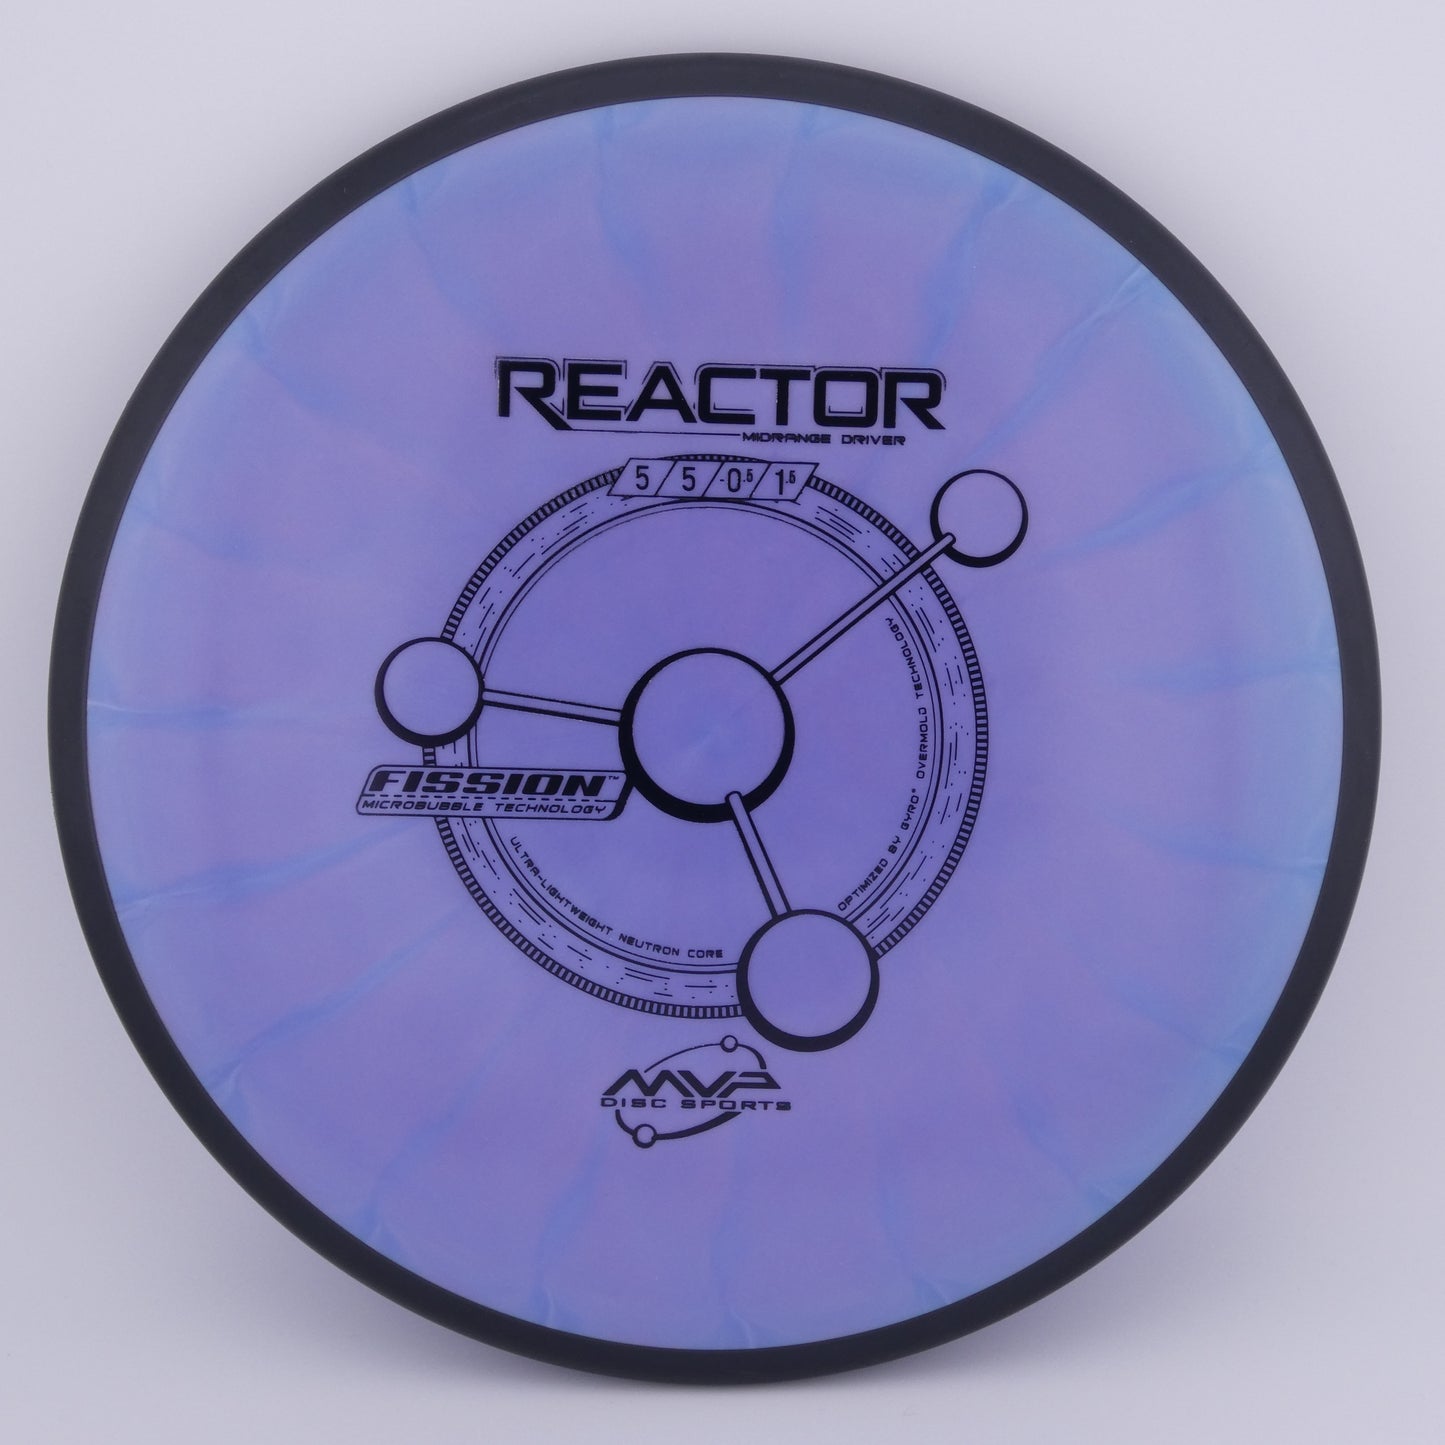 Fission Reactor 170-175g